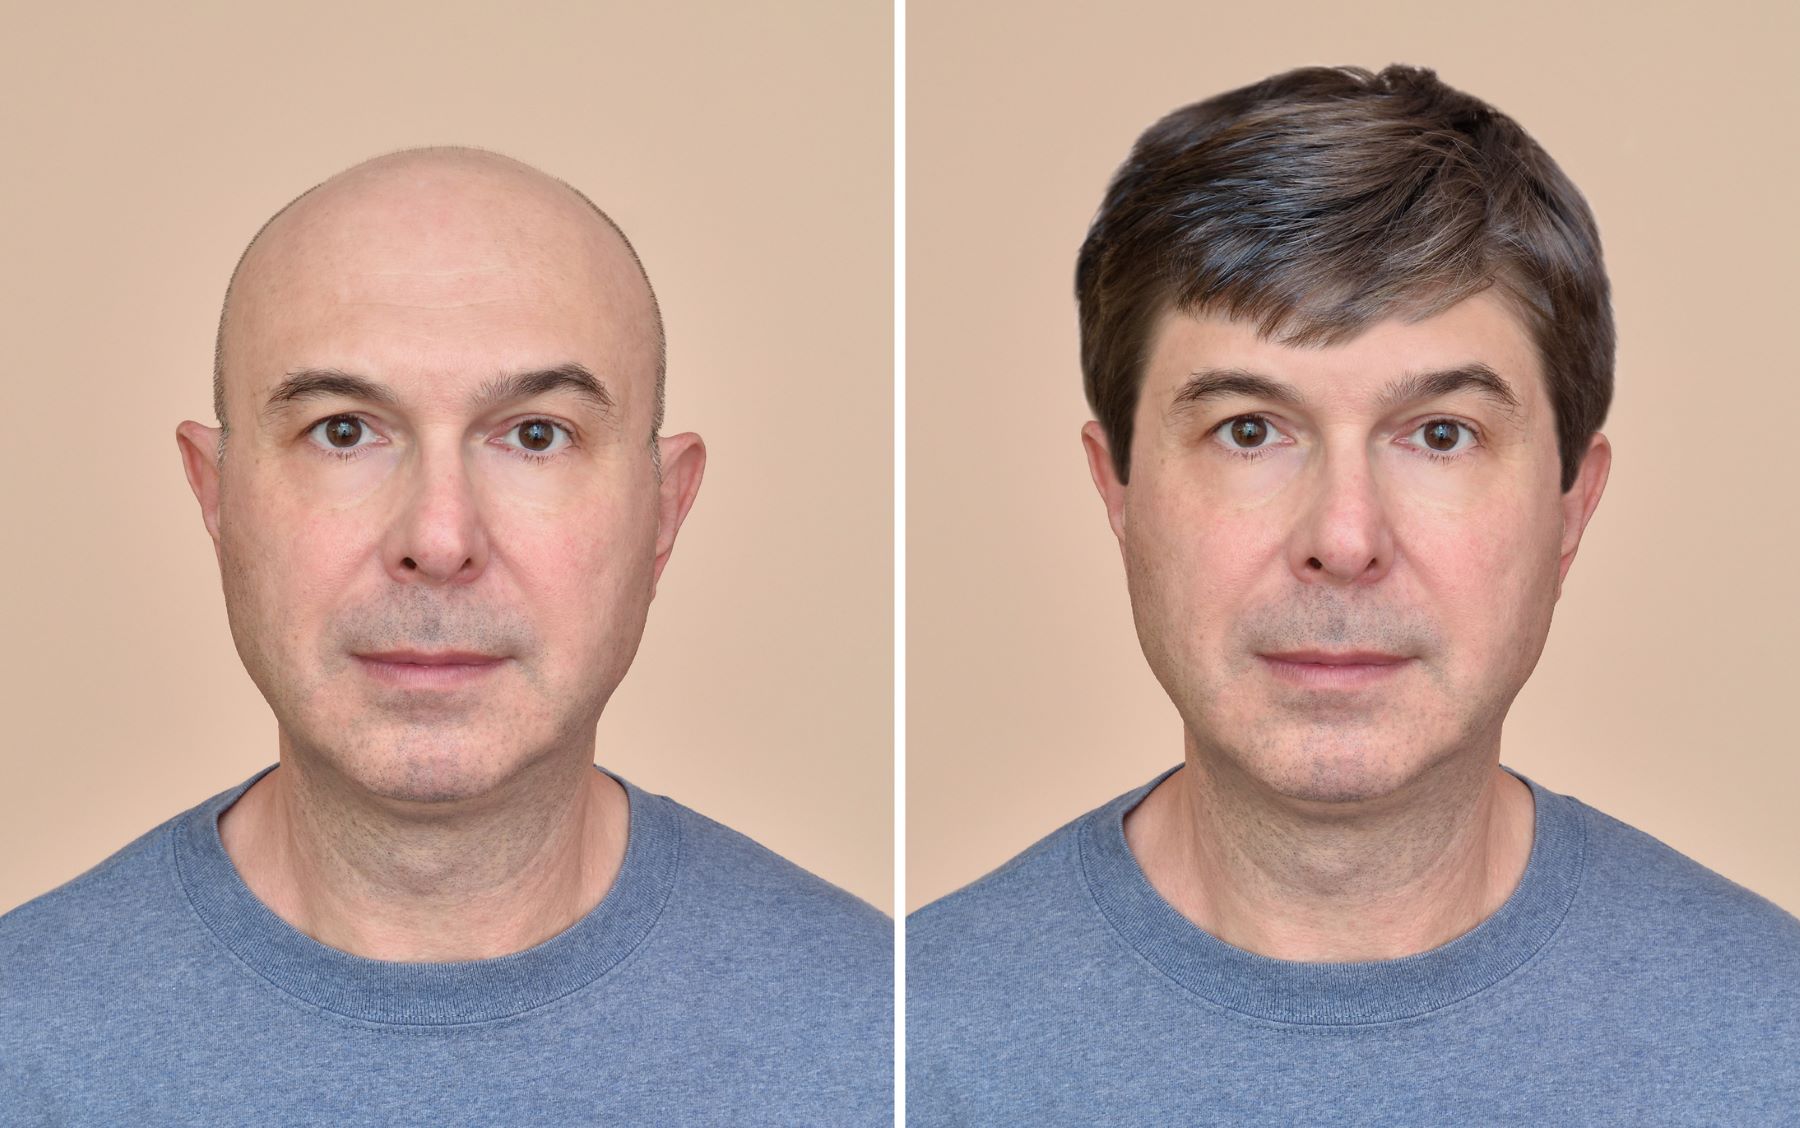 Man before and after wearing a hair system